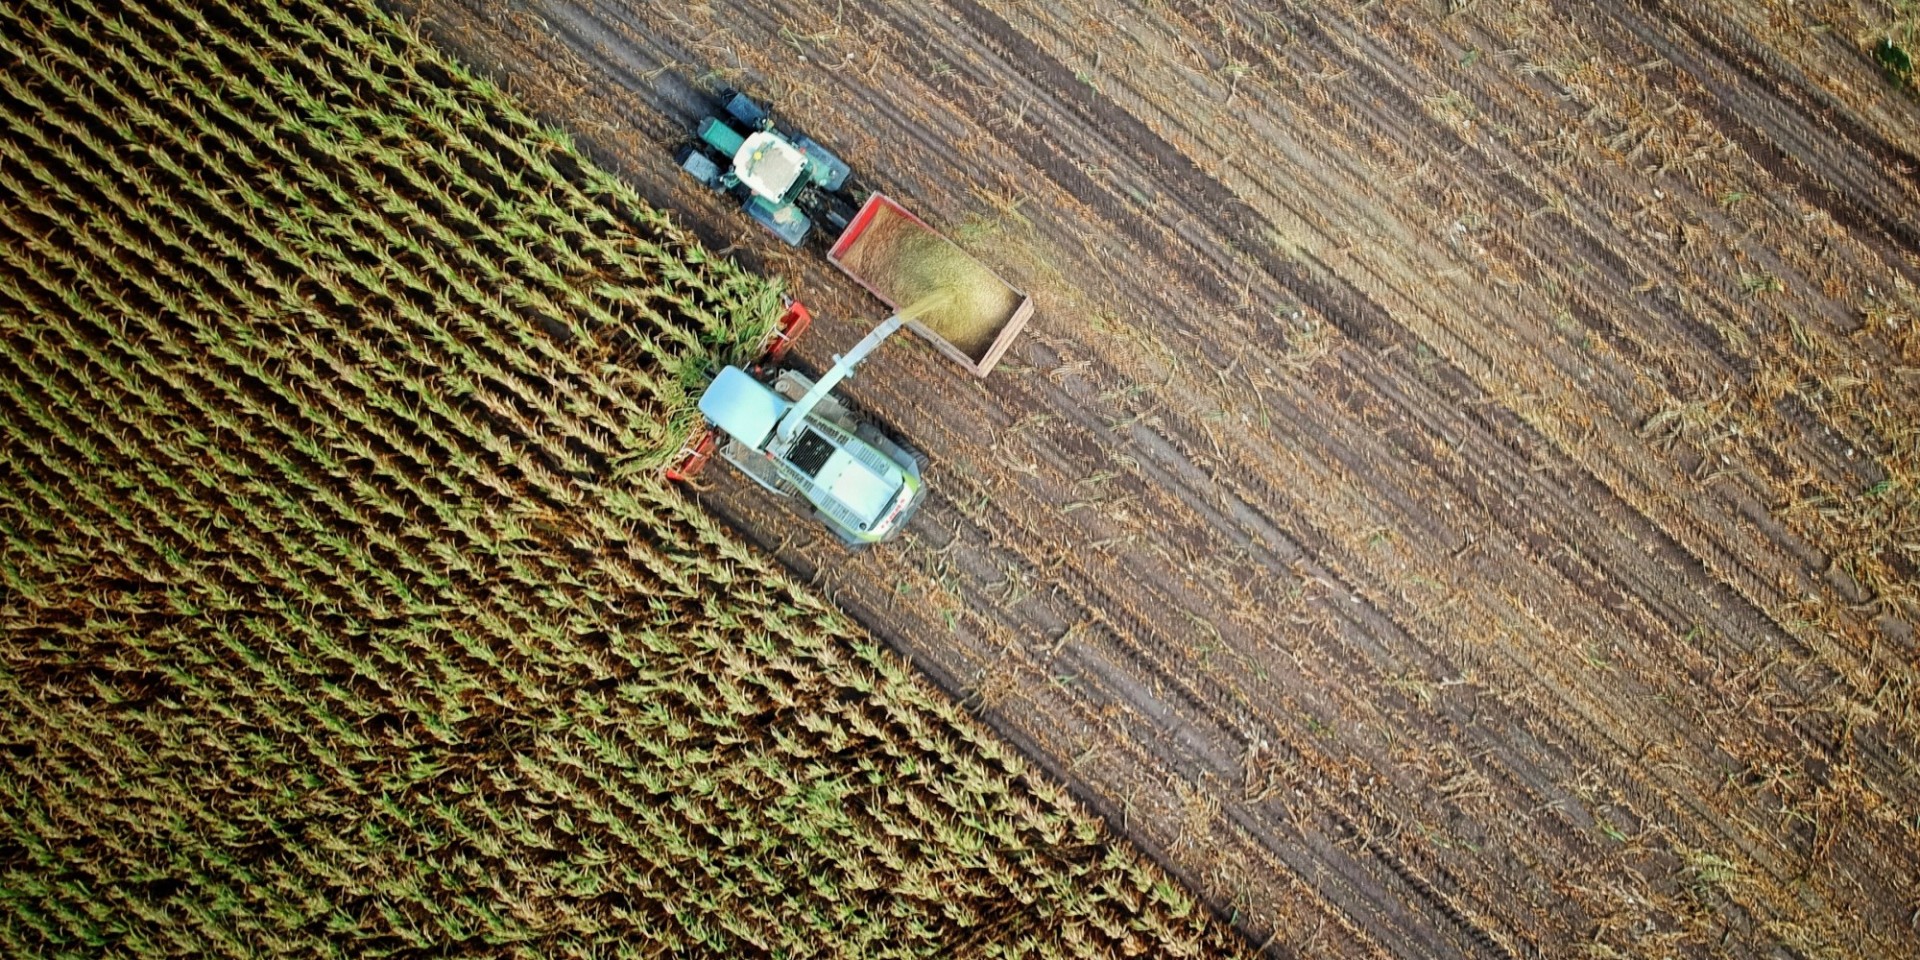 Tractor in a field harvesting crops